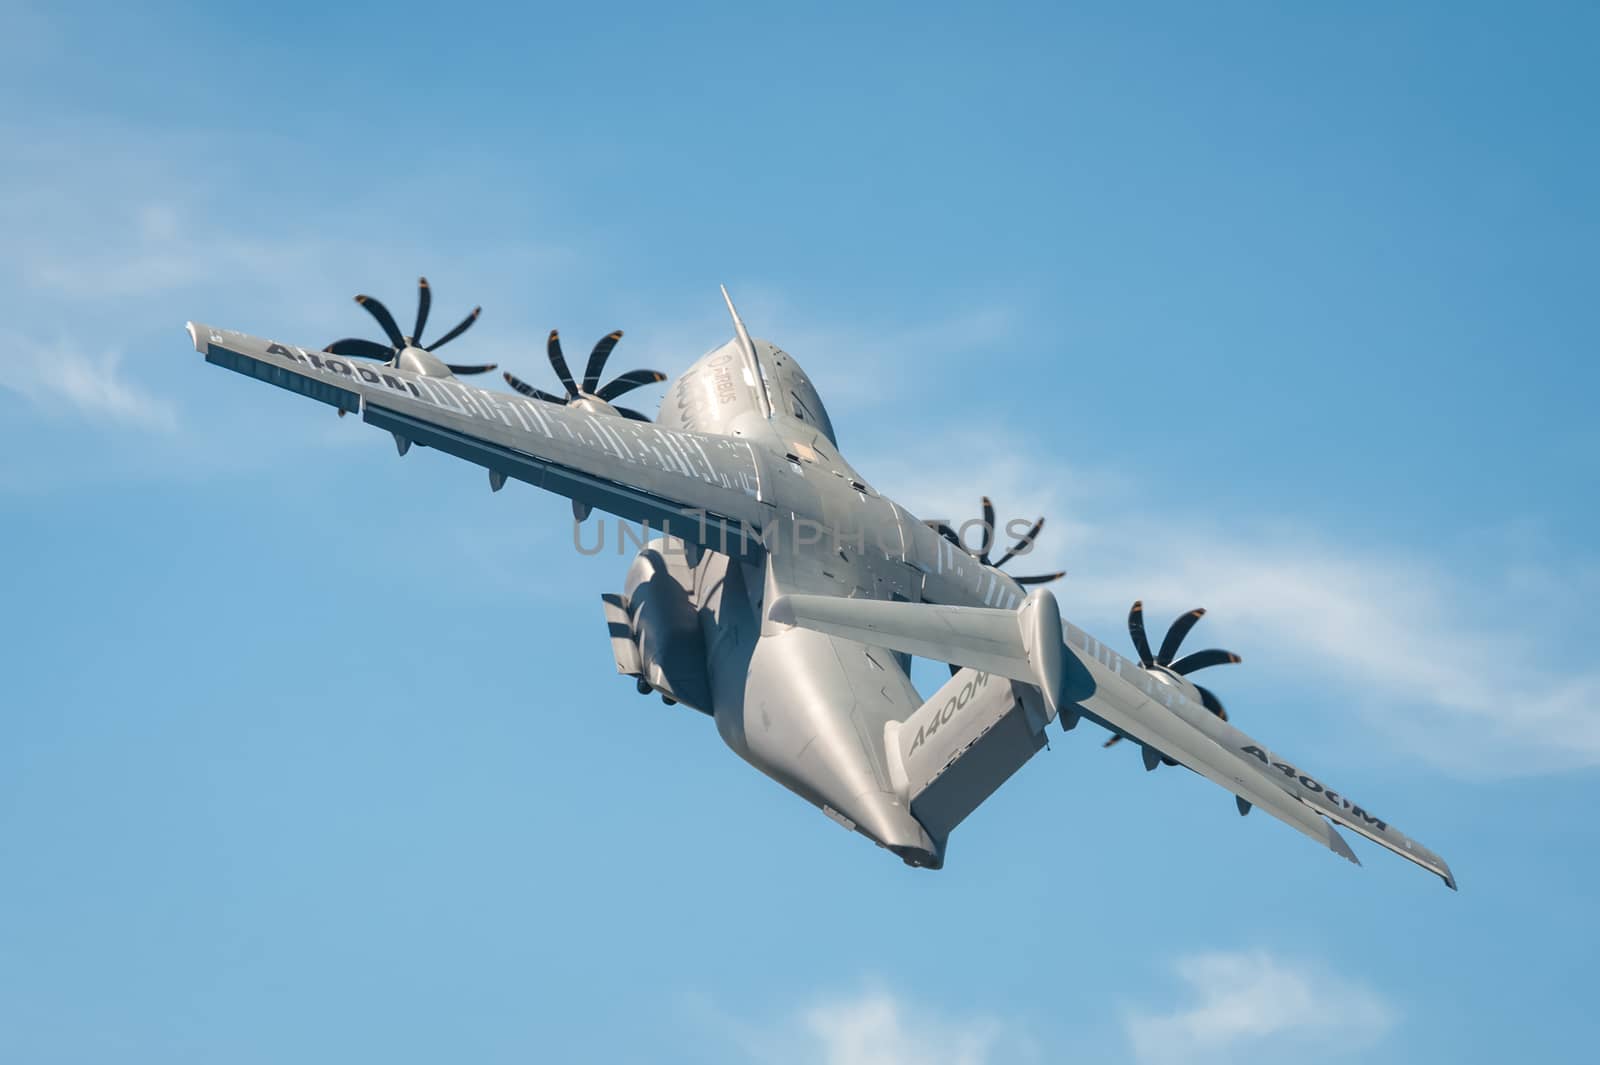 Farnborough, UK - July 18, 2014: Closeup of an Airbus A400M military transporter aircraft in a steep climb after take-off from Farnborough, Hampshire, UK